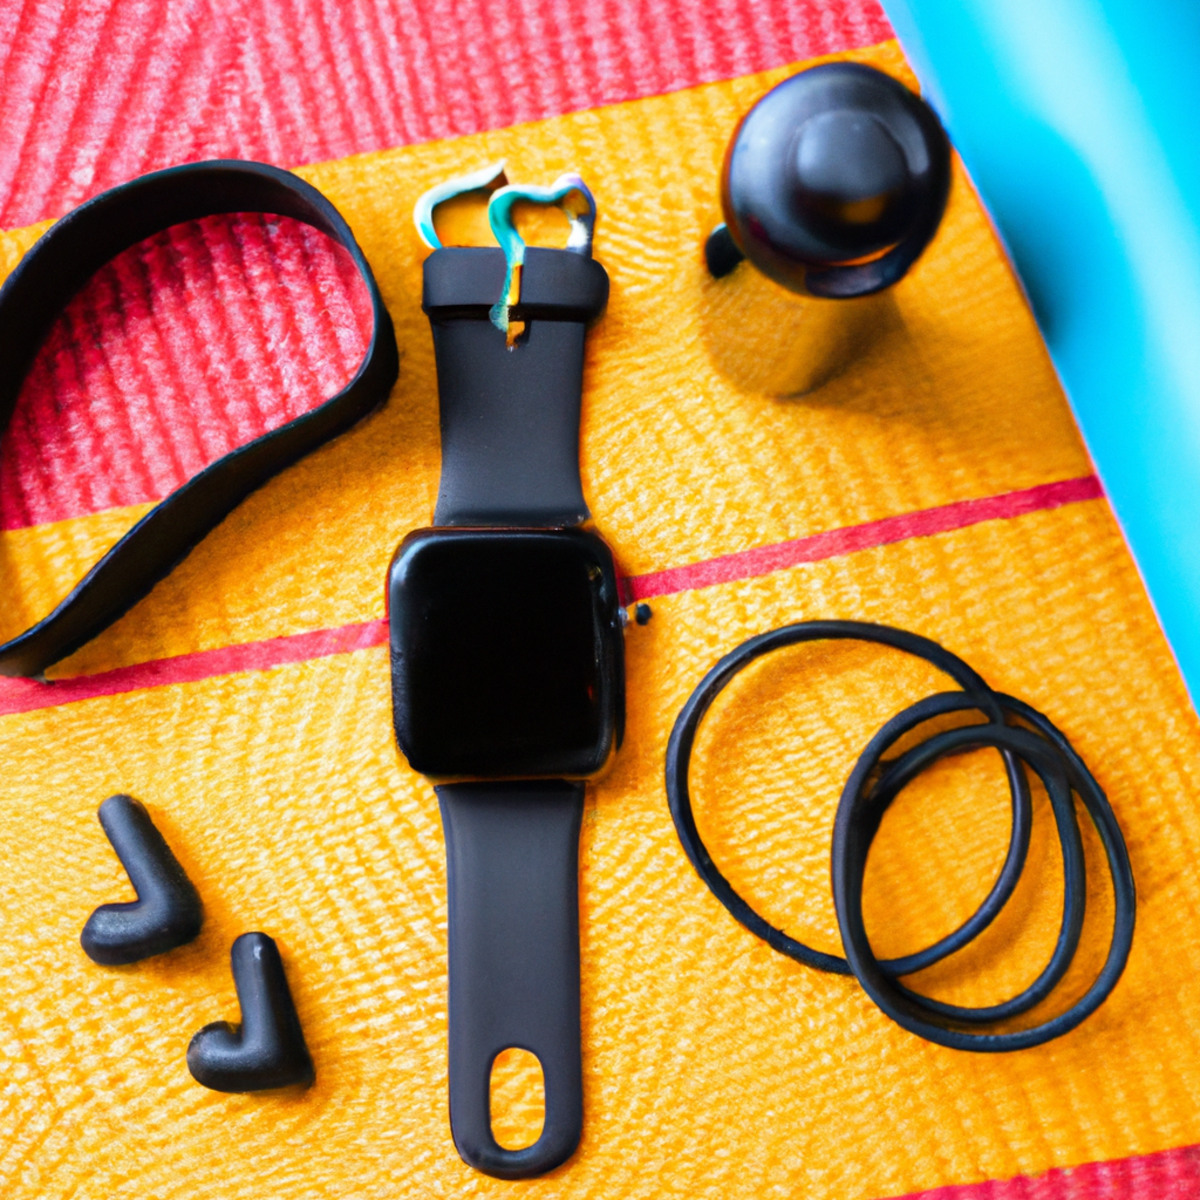 The photo features a sleek black fitness tracker watch, representing the latest in Fitness Apps and Wearables, resting on top of a yoga mat, surrounded by a pair of wireless earbuds, a water bottle, and a set of resistance bands. The watch, a prime example of a cutting-edge wearable device, displays a heart rate monitor and step count, providing real-time data for the user's fitness journey. The earbuds are connected to a smartphone, which showcases a popular fitness app, highlighting the integration of technology into fitness routines. The vibrant colors of the yoga mat and resistance bands add a pop of energy to the otherwise monochromatic scene, further emphasizing the importance of both technology and physical activity in achieving a healthy lifestyle.